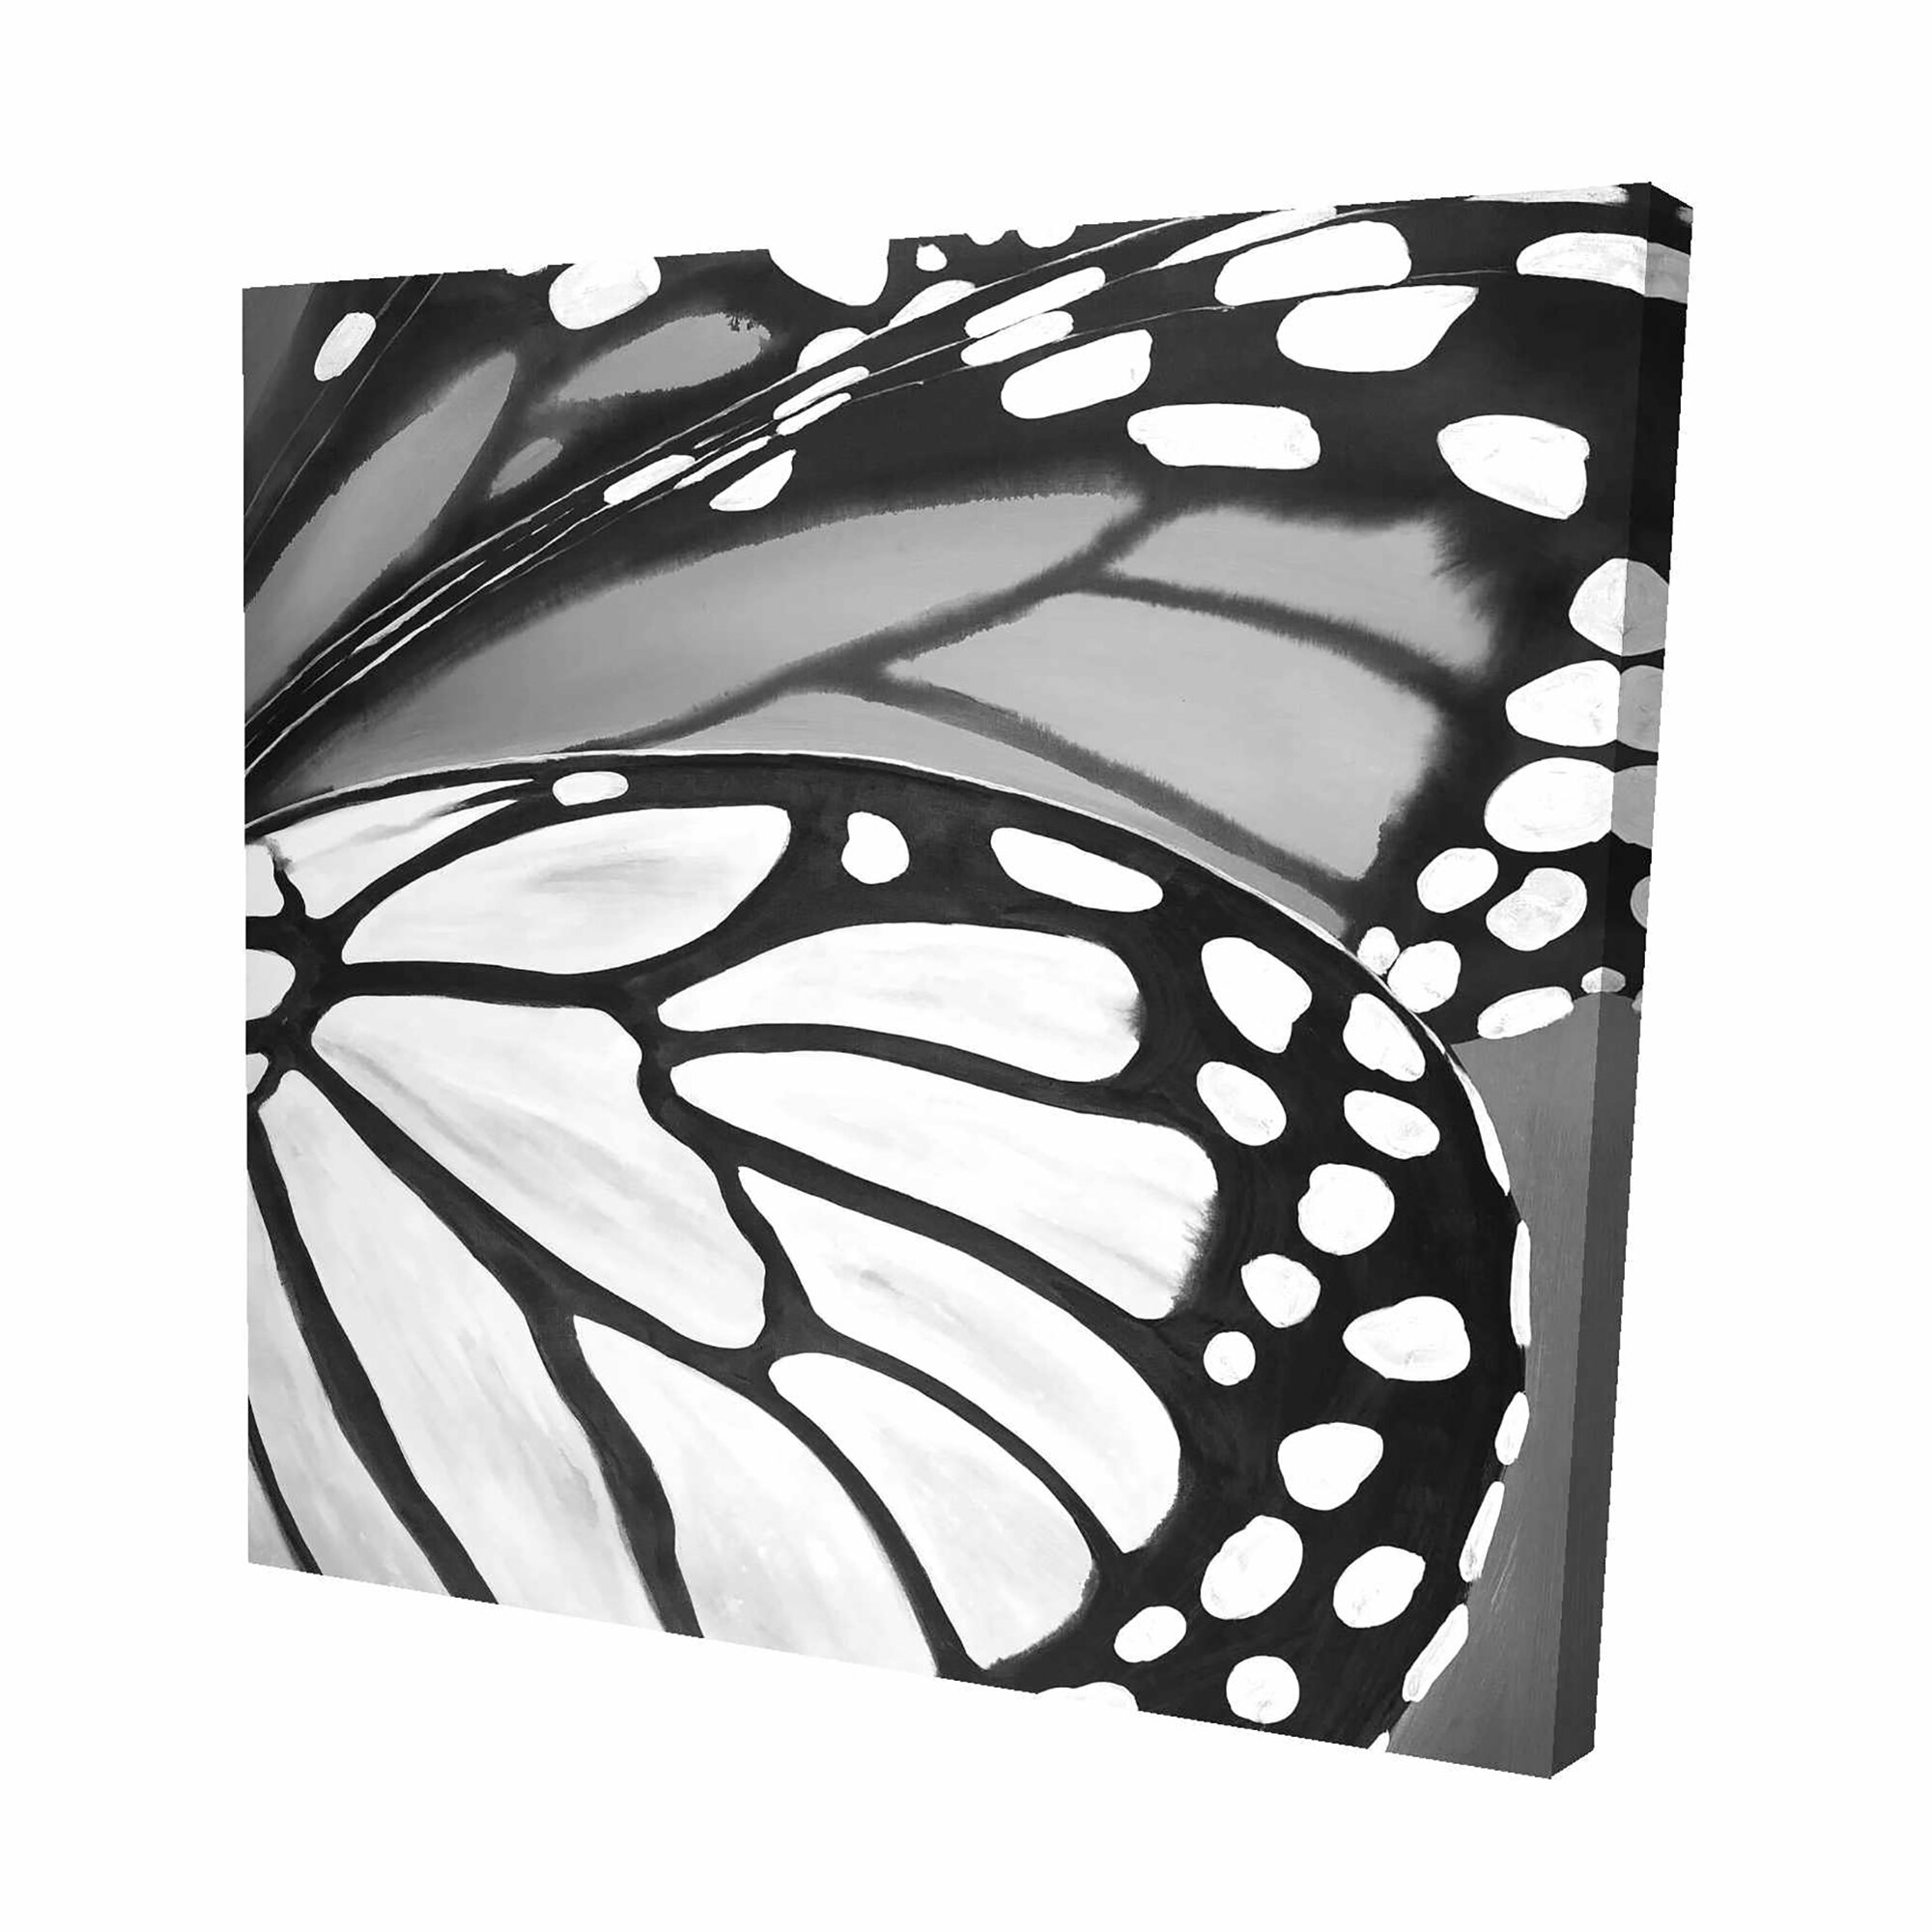 butterfly wing pattern close up